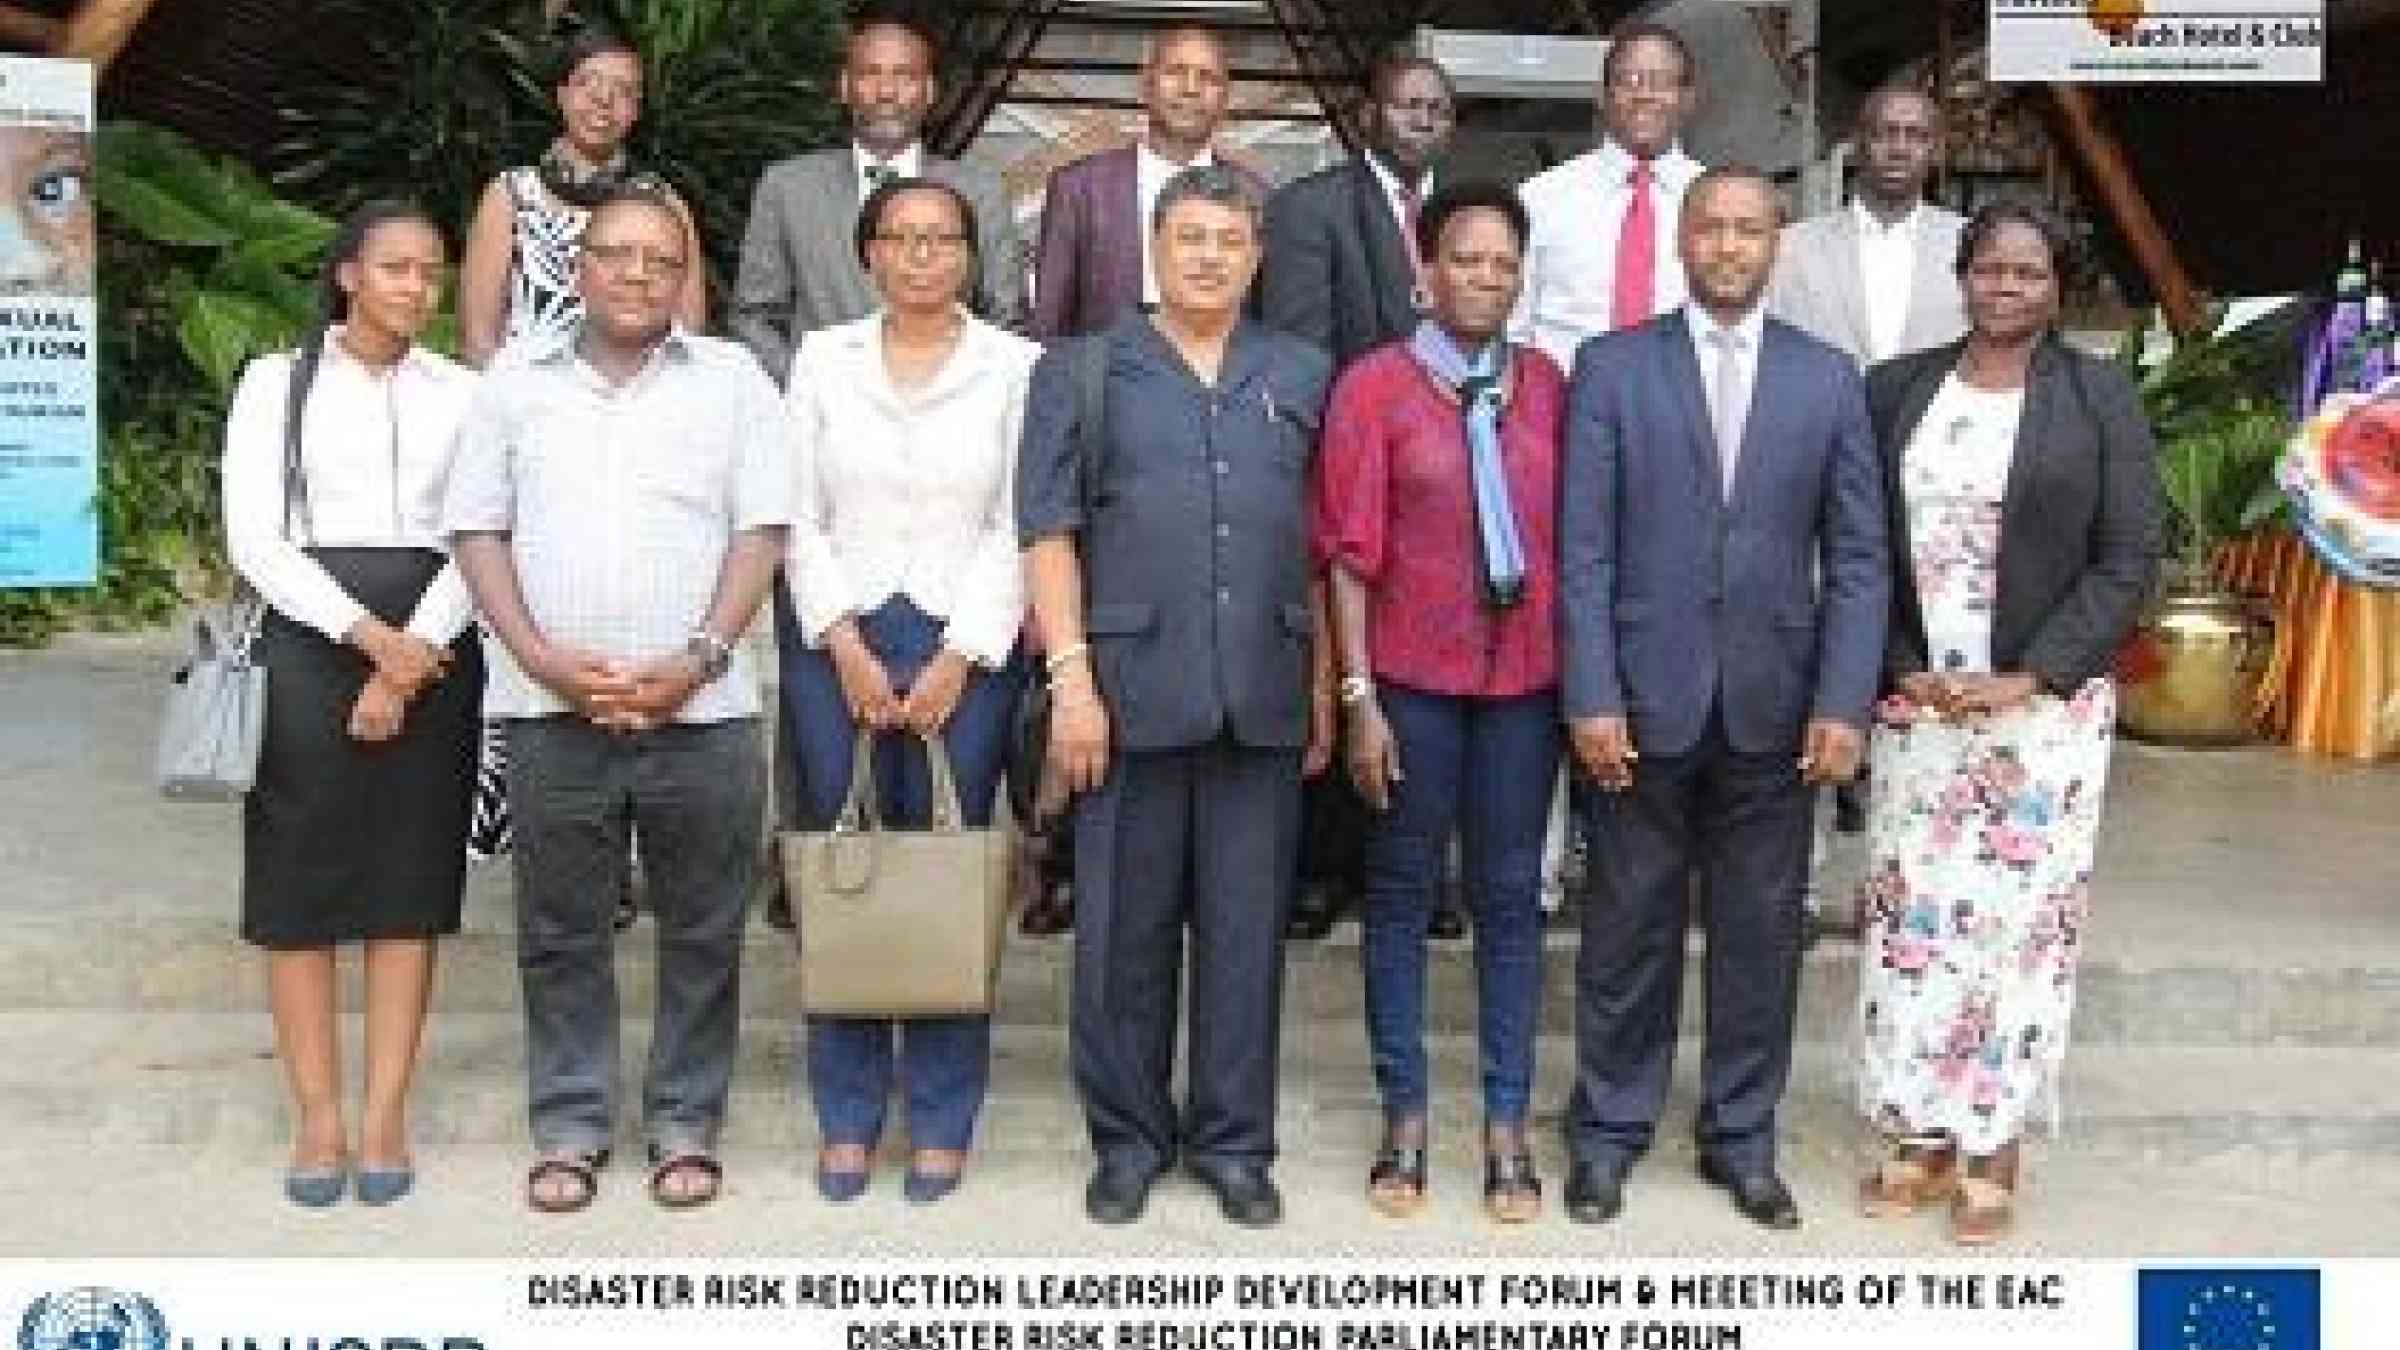 Participants at the East African Community (EAC) Parliamentarian Forum on disaster risk reduction have pledged to step up the region's efforts to curb hazard impacts (Photo: UNISDR)